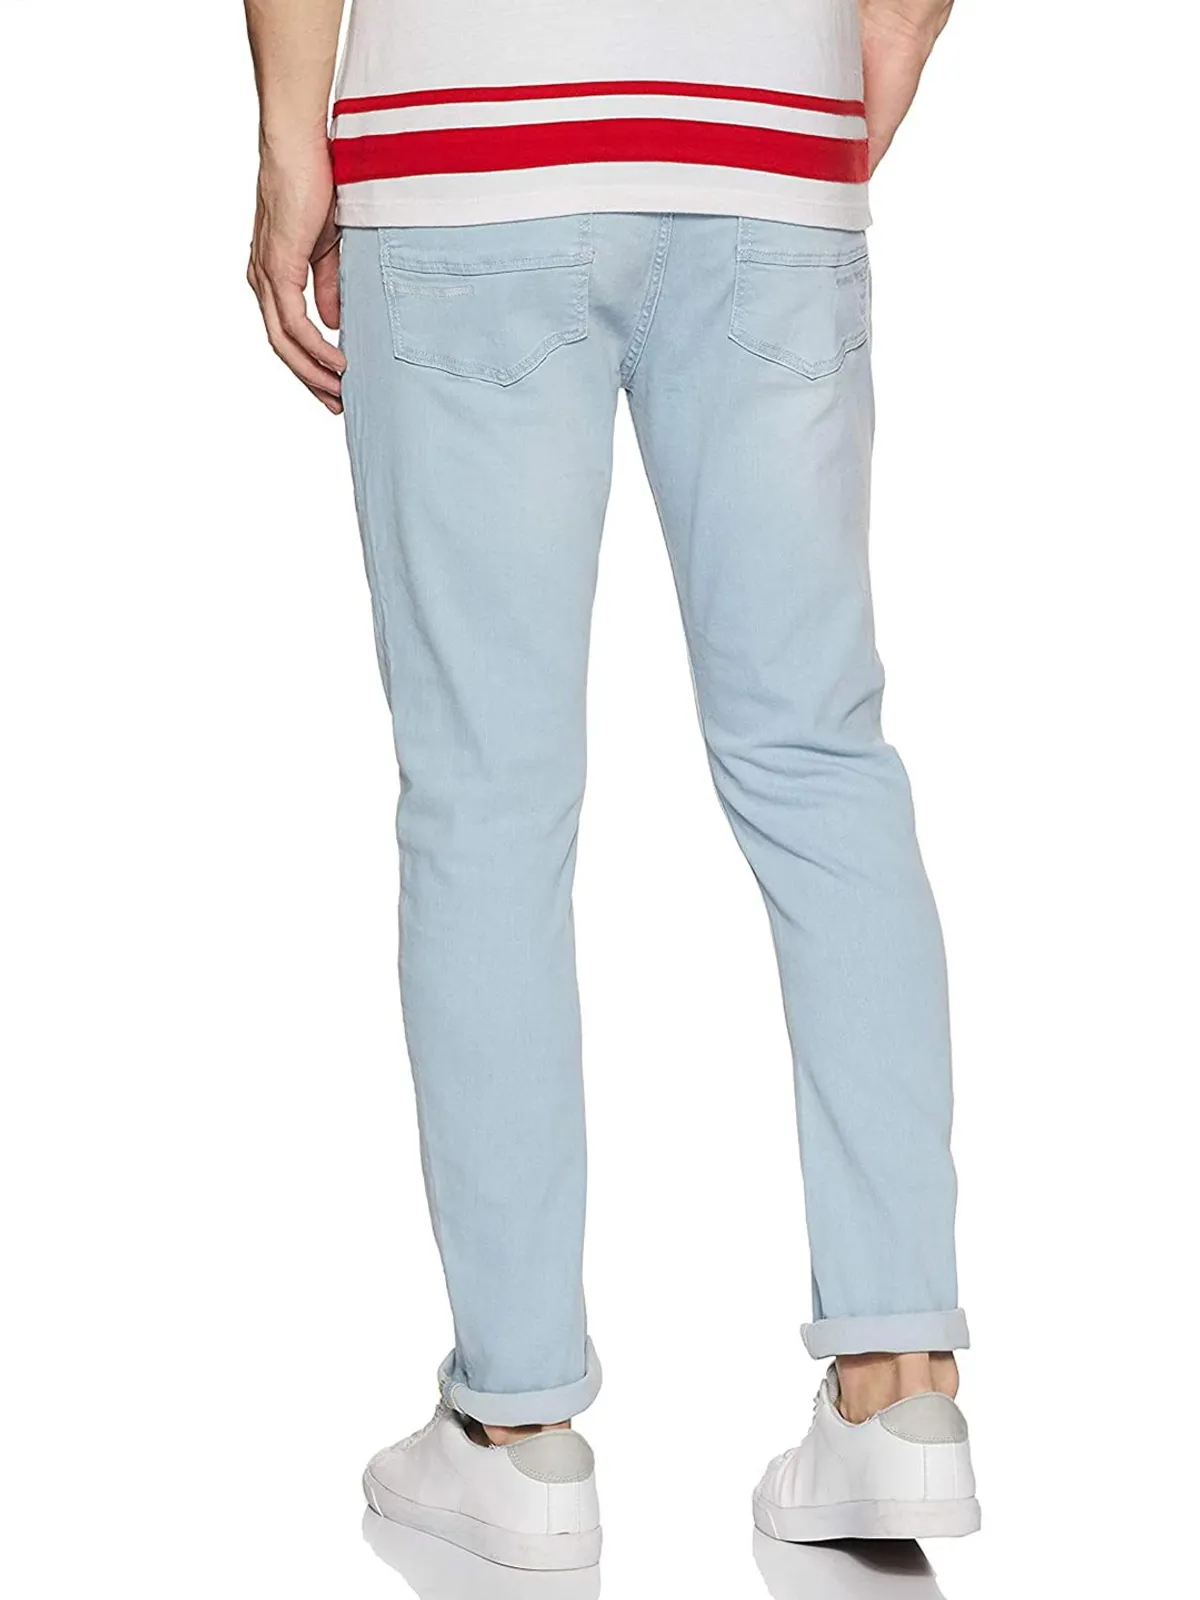 United Colors of Benetton slim fit solid light blue jeans